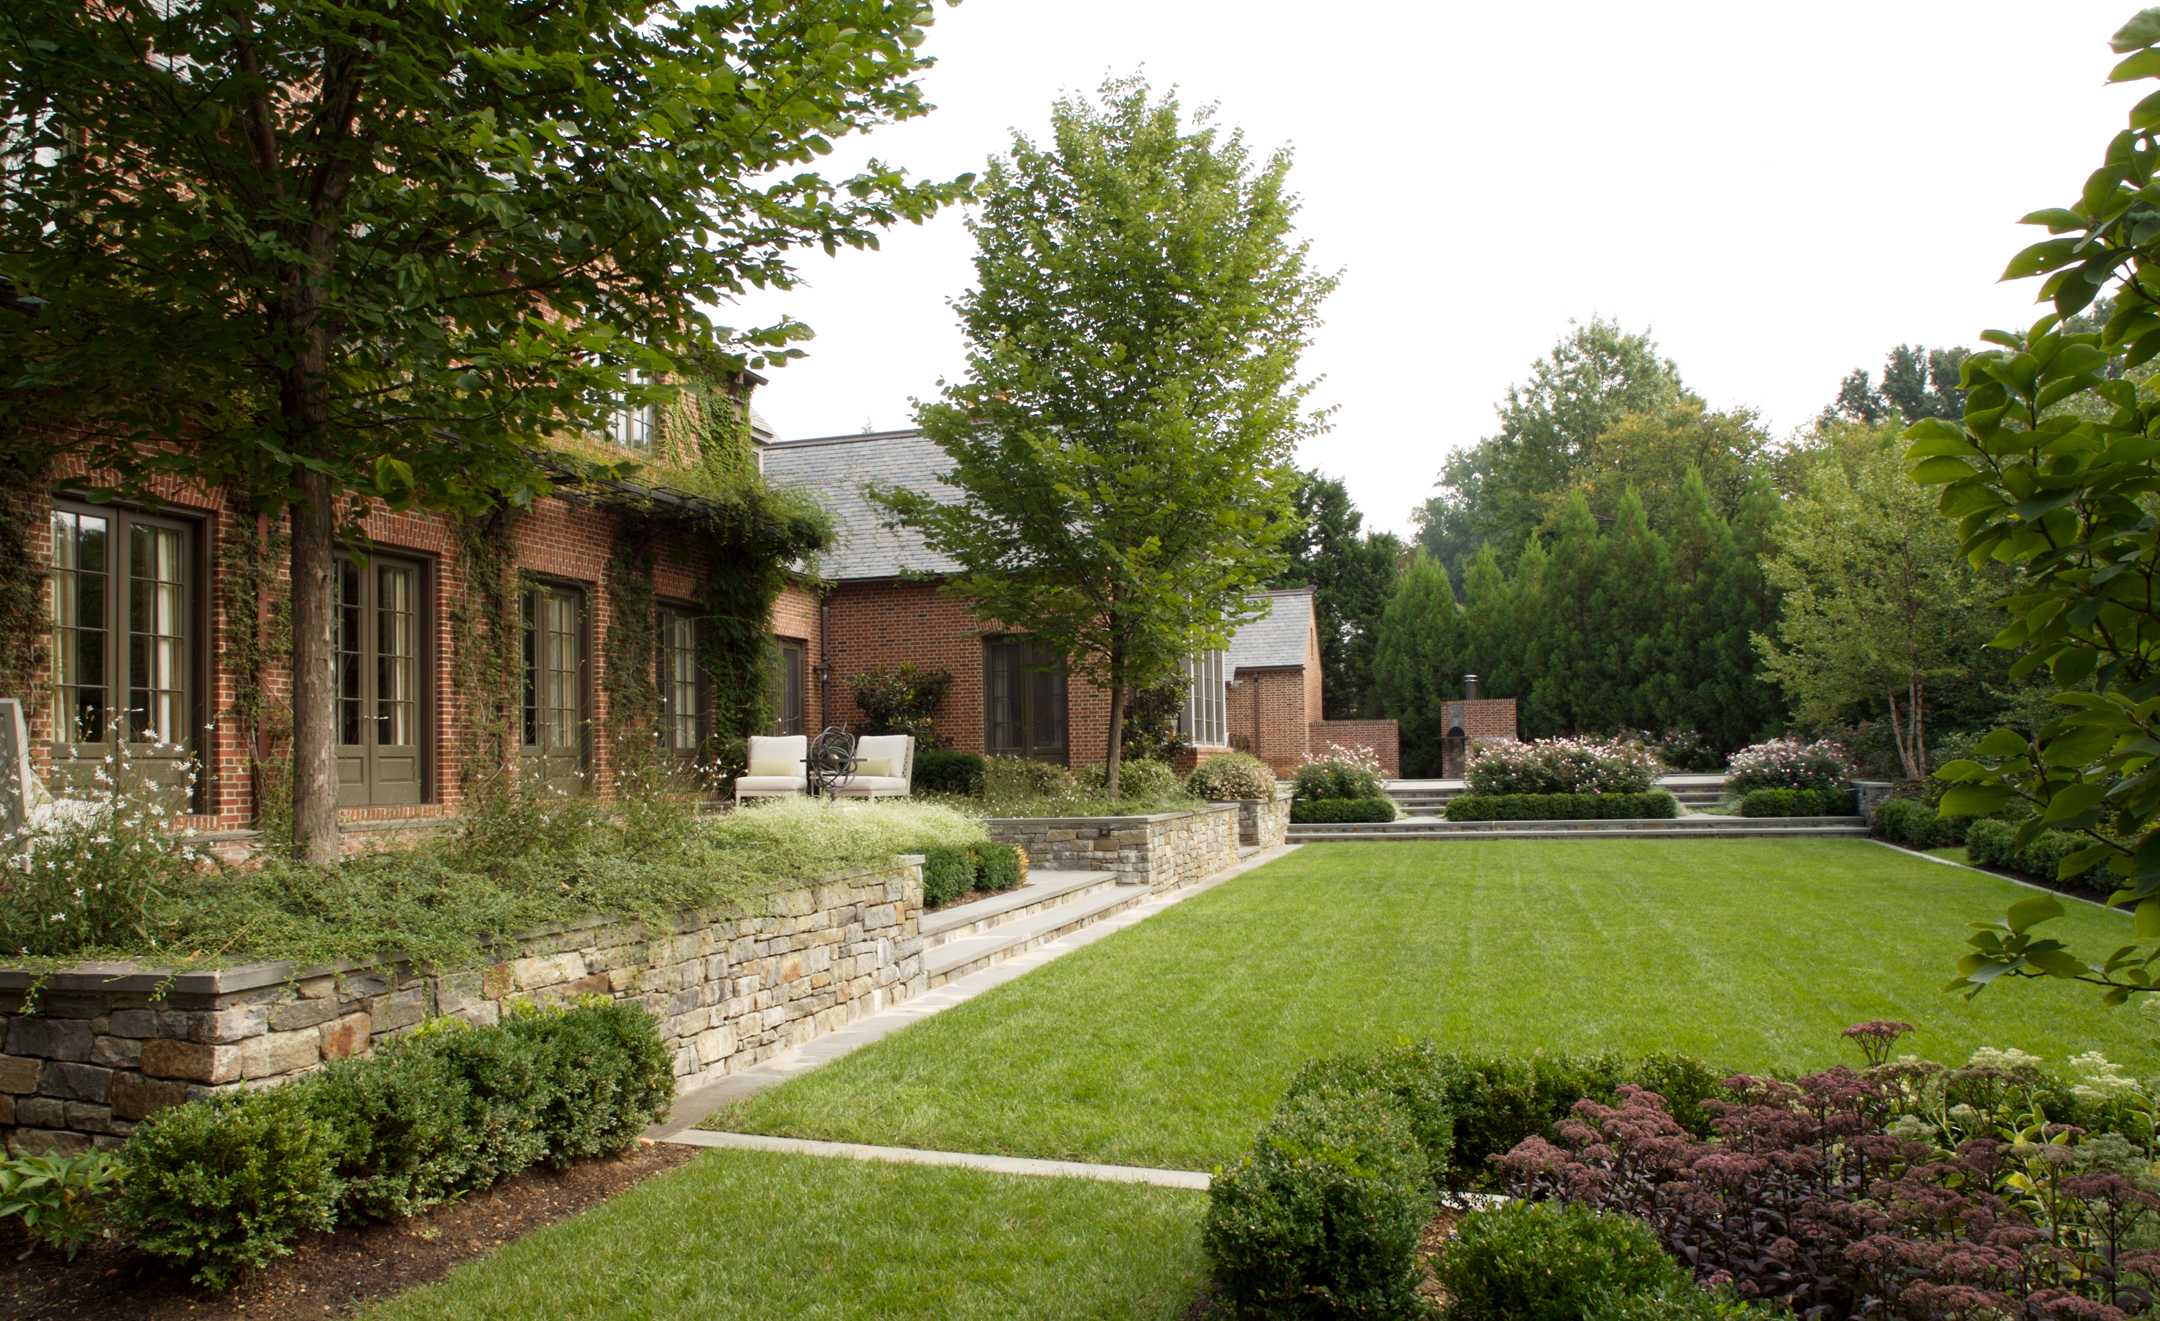   Project Location:  Chevy Chase, Maryland  Completion:  &nbsp;2006  General Contractor:  &nbsp;Gibson &amp; Associates  Project Architect:  Jones &amp; Boer  Primary Material Palette:  &nbsp;brick, bluestone, fieldstone, boxwood  Photos By:  Victori